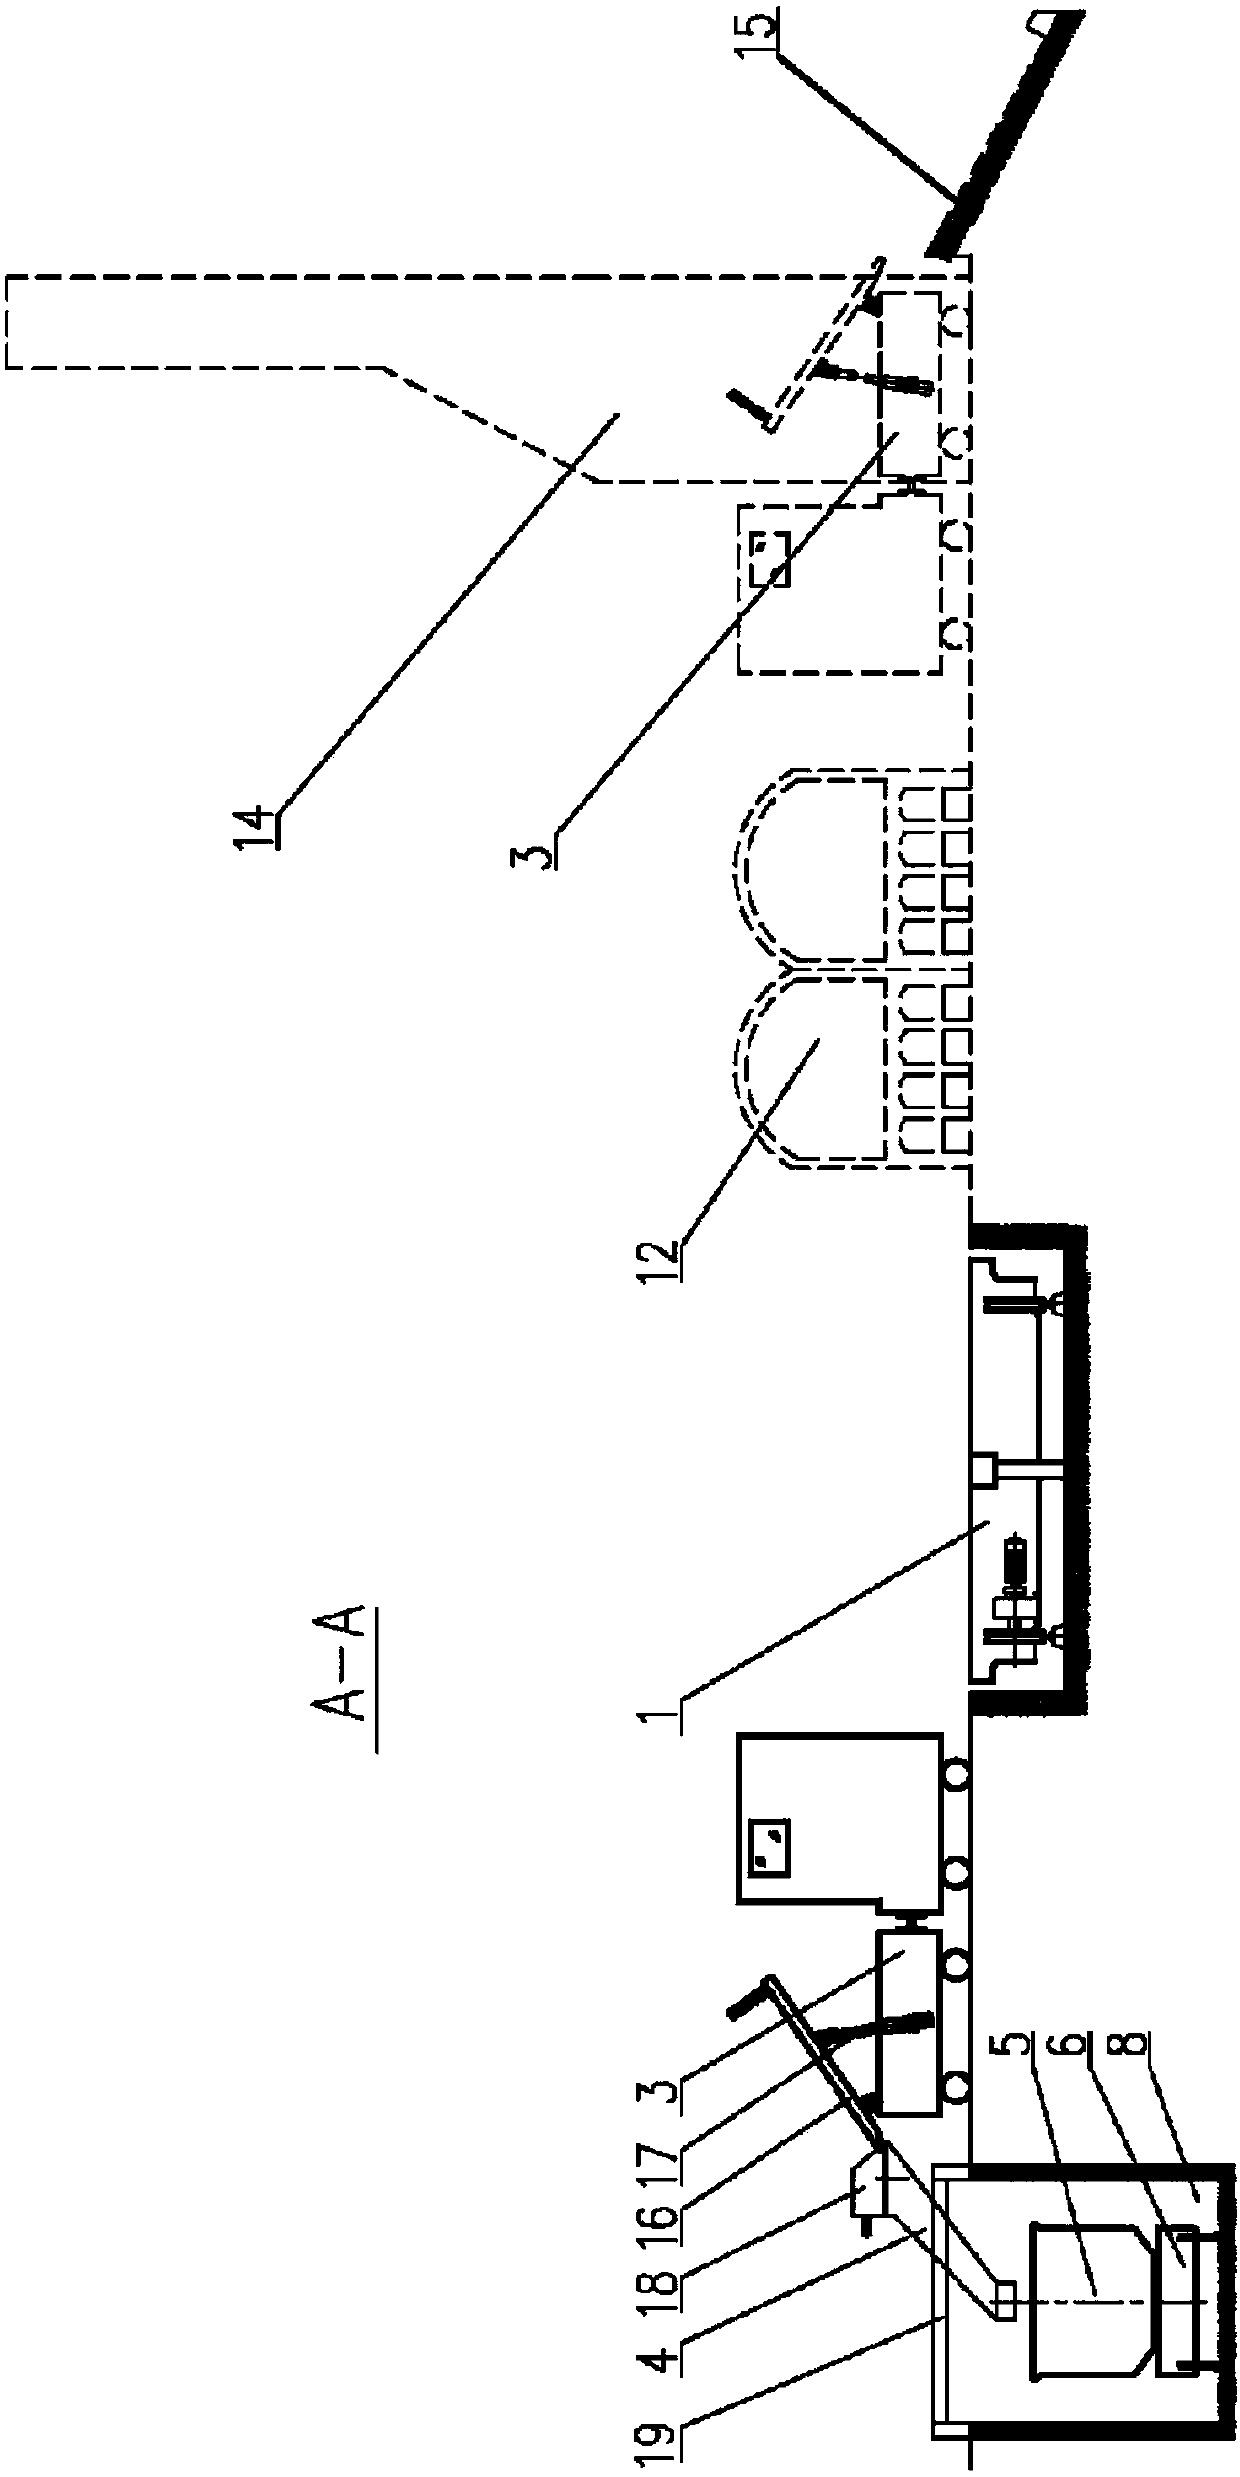 Red coke transporting apparatus and red coke transporting method suitable for quenching coke